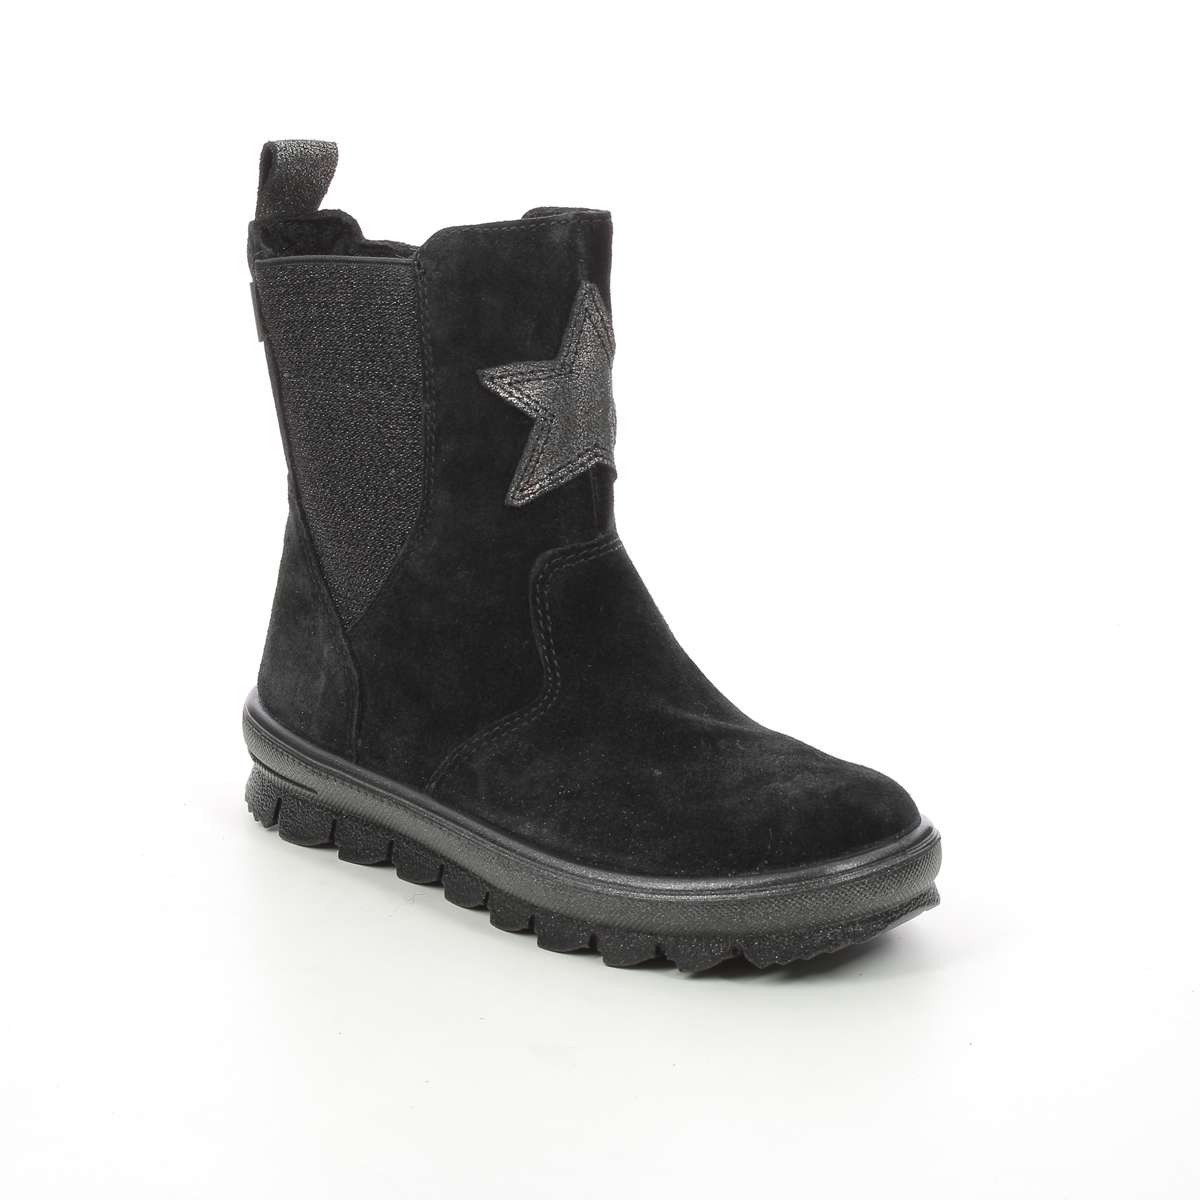 Superfit Flavia Star Gtx Black suede Kids Girls boots 1000217-0000 in a Plain  in Size 27